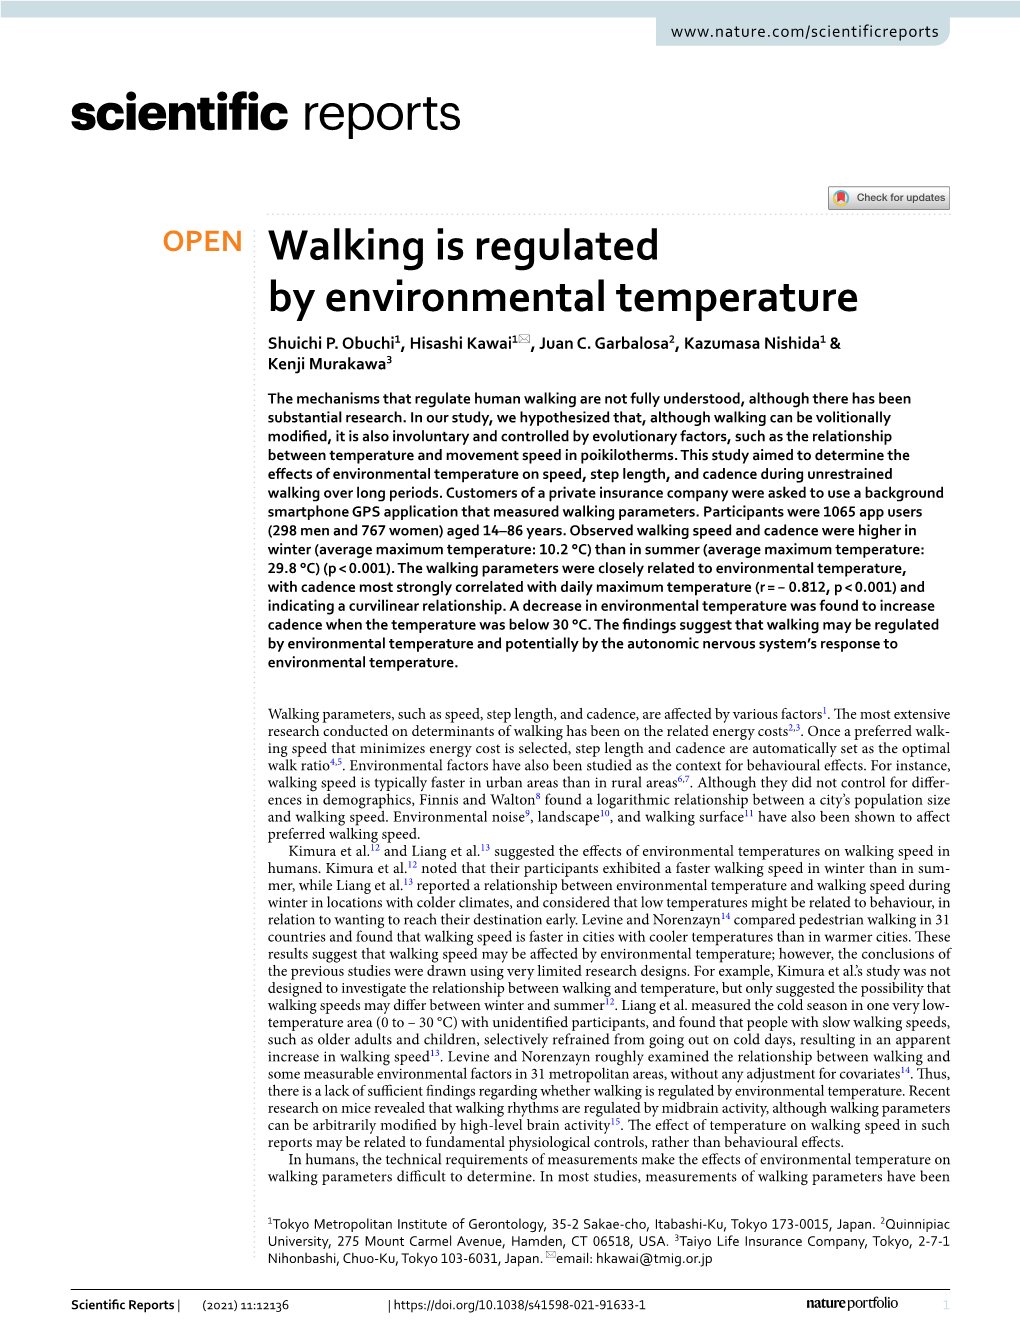 Walking Is Regulated by Environmental Temperature Shuichi P